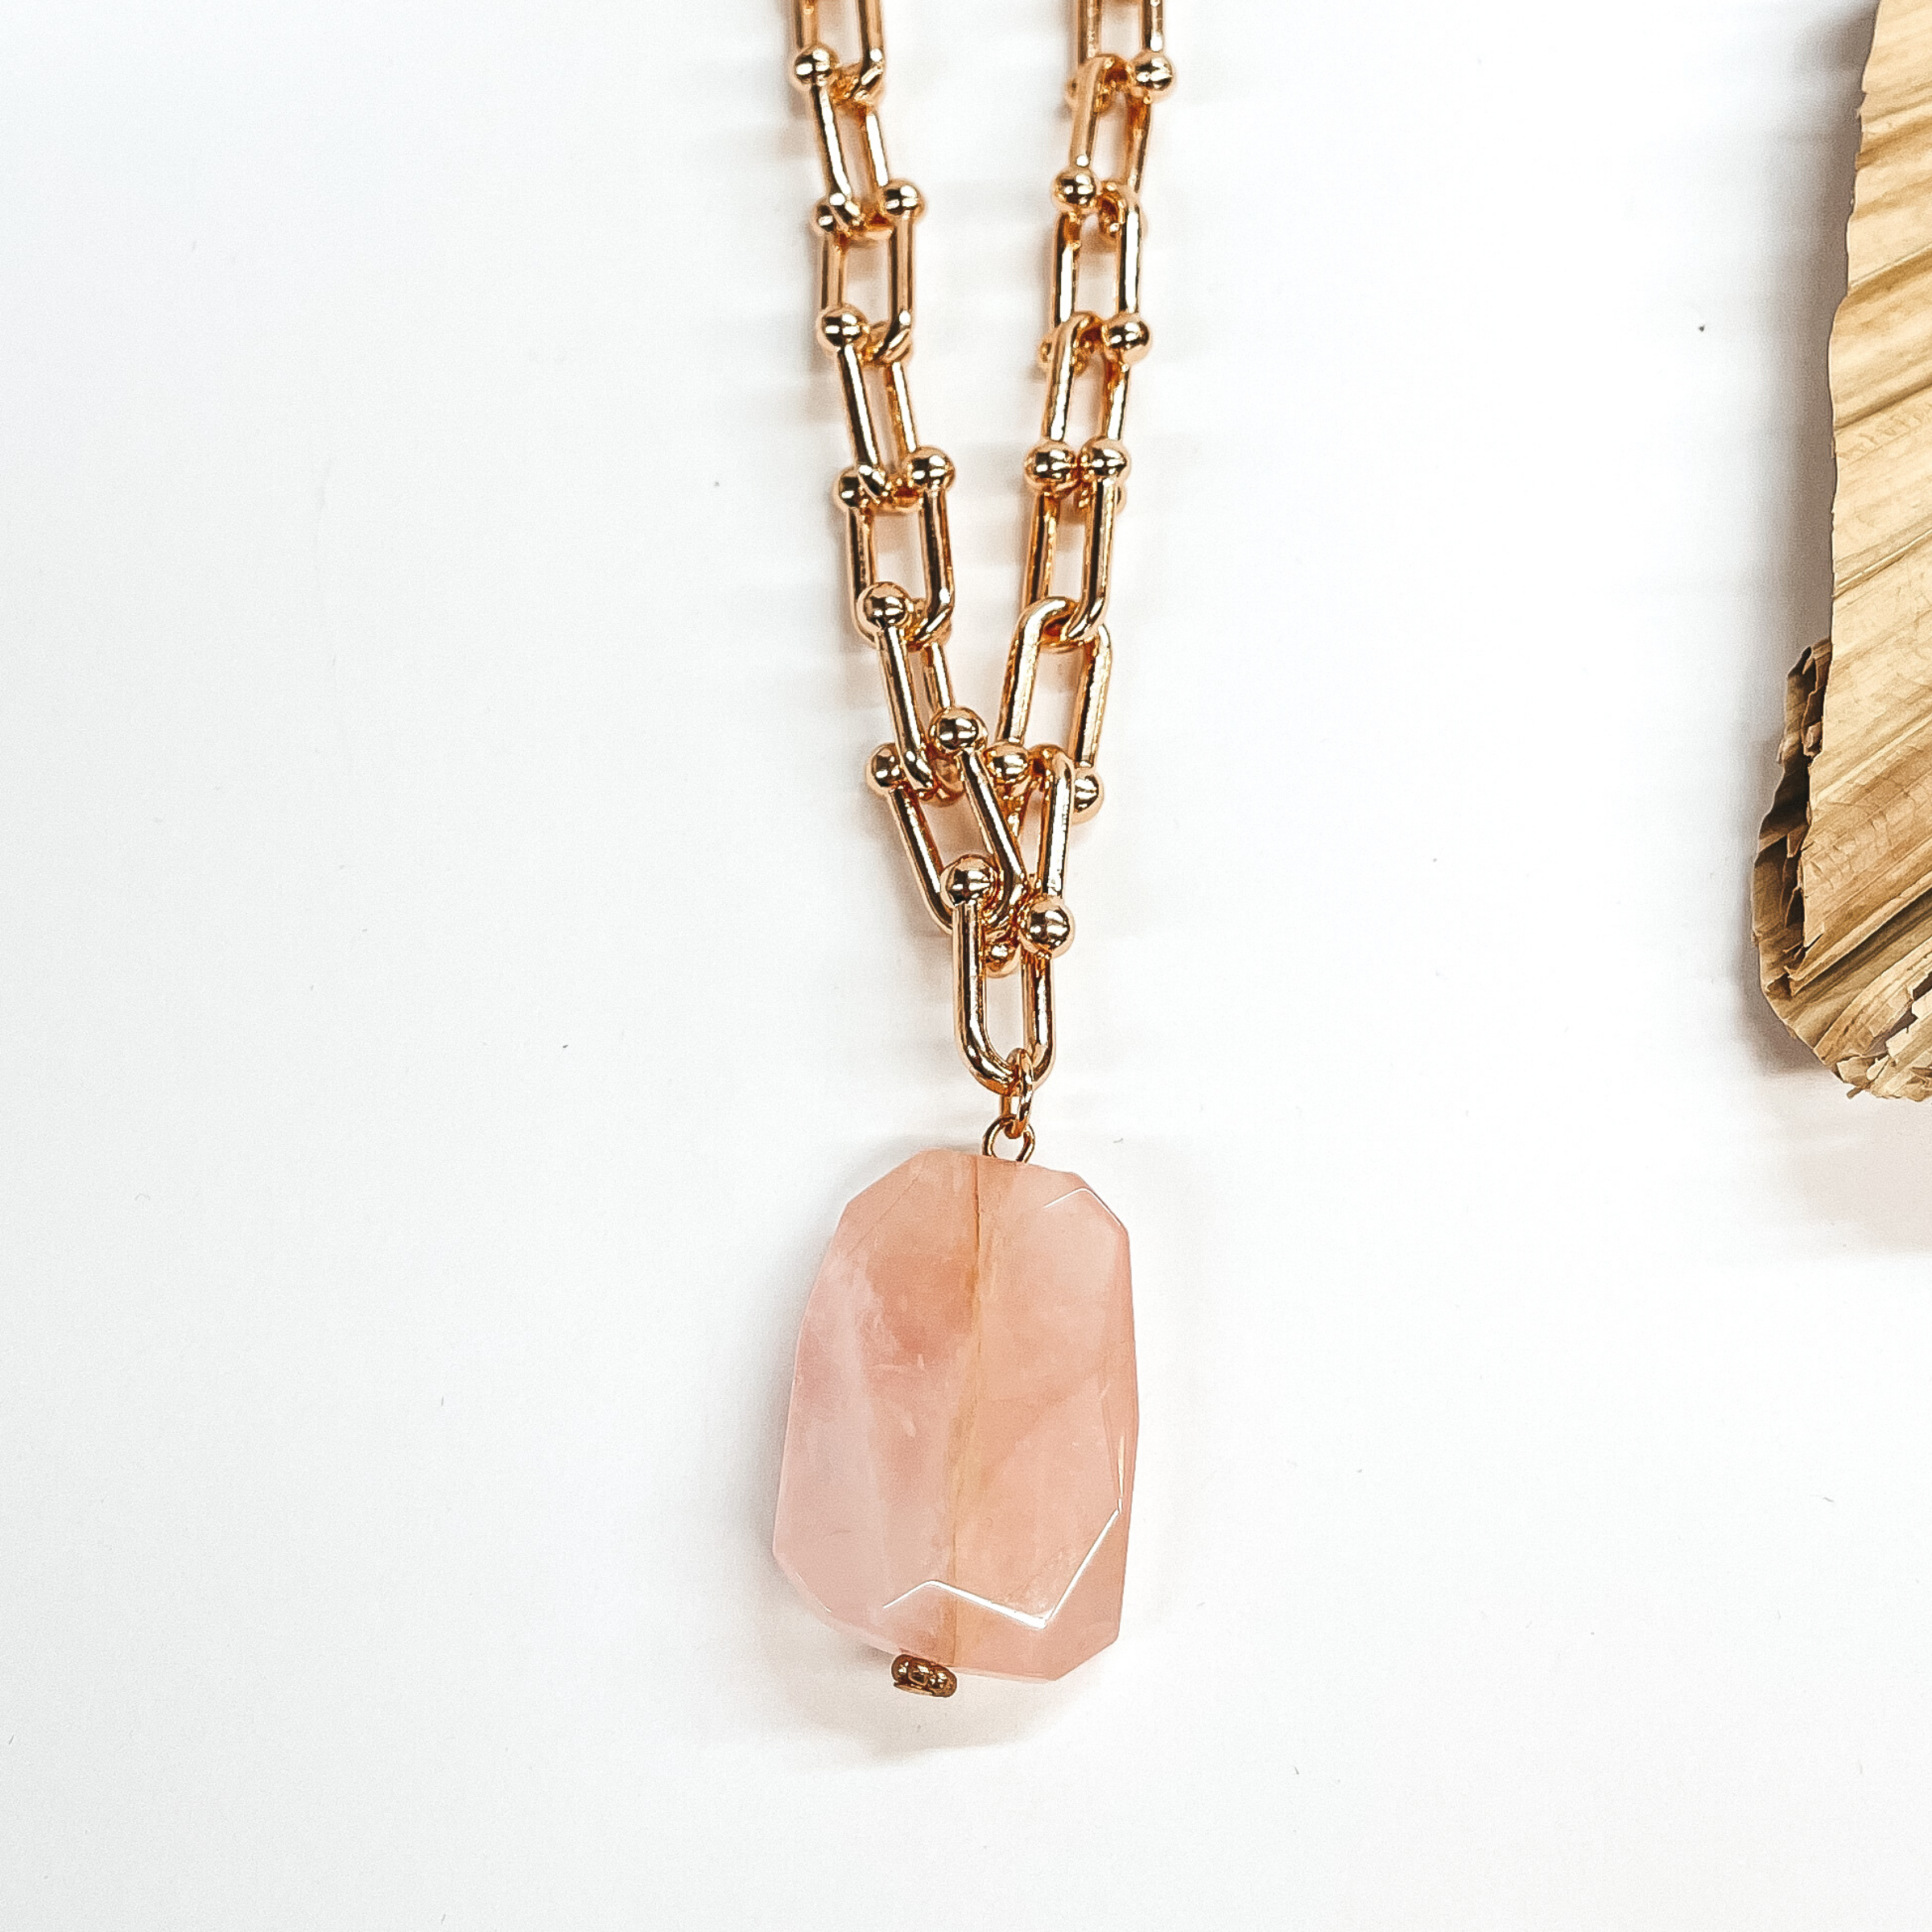 Thick Chain Link Necklace with Chunky Light Pink Stone Pendant - Giddy Up Glamour Boutique